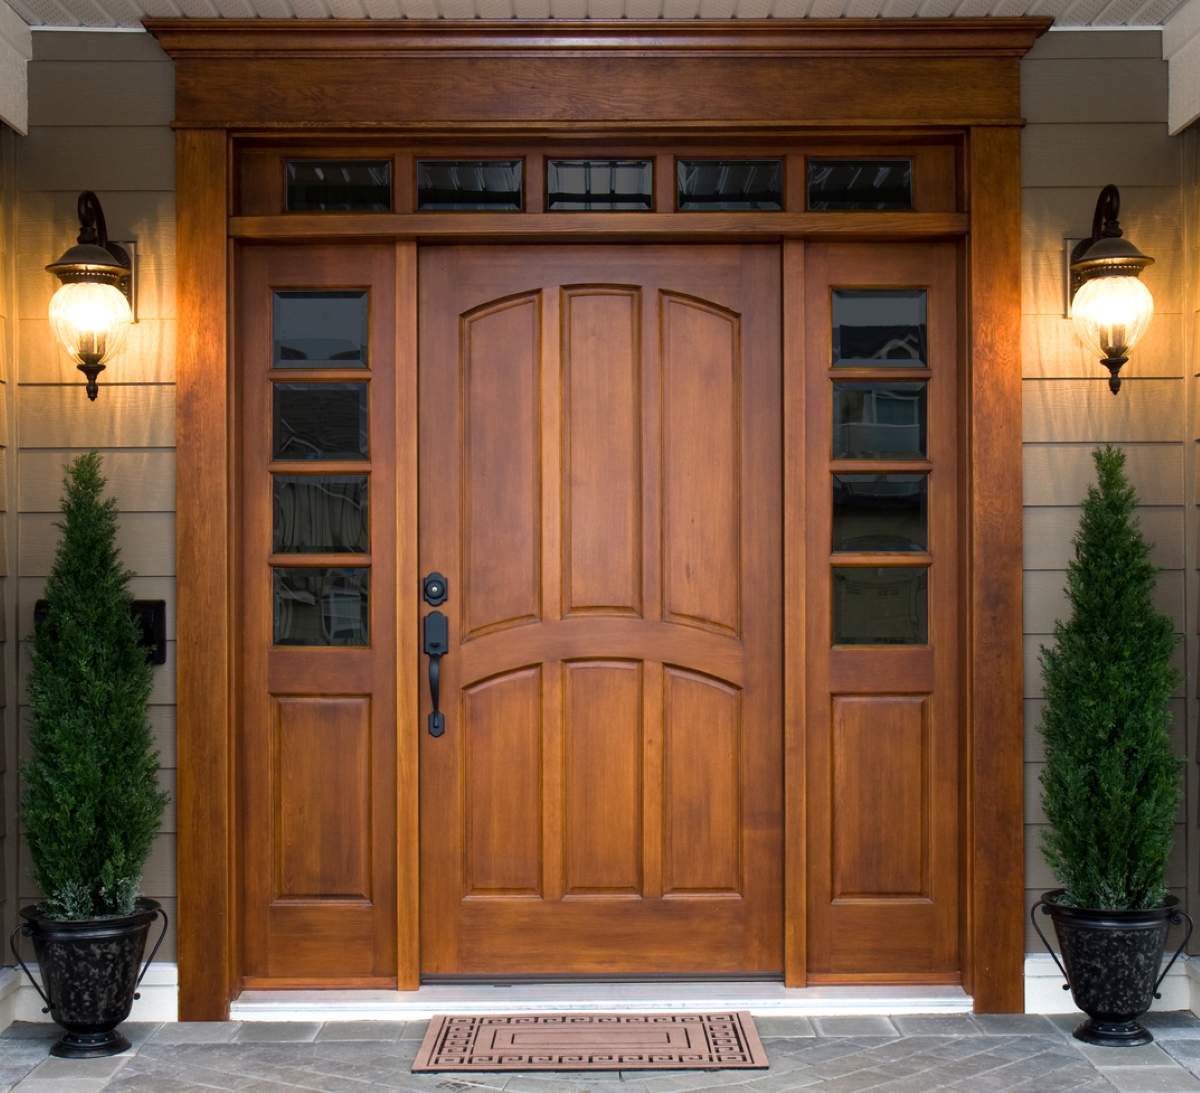 When Remodeling an Old House, What Should You Keep - wood door